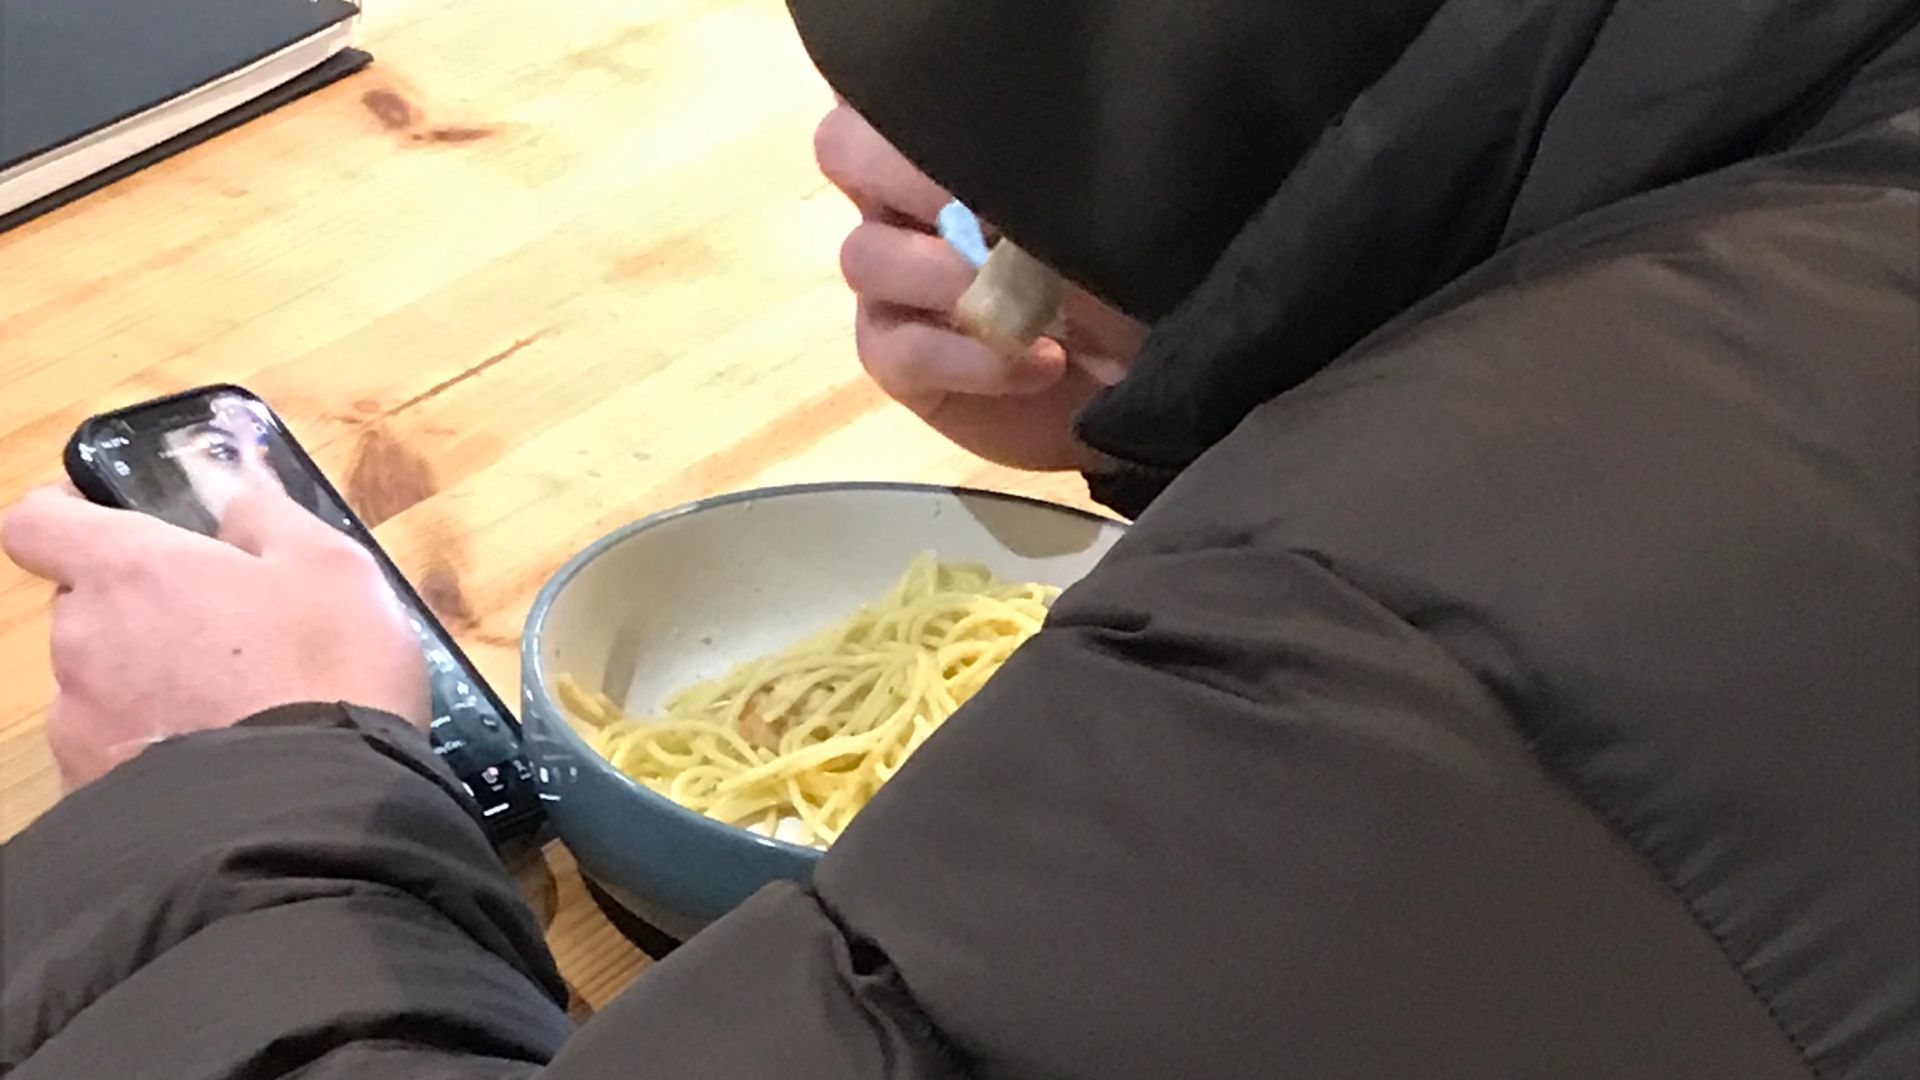 A person in a coat eating pasta